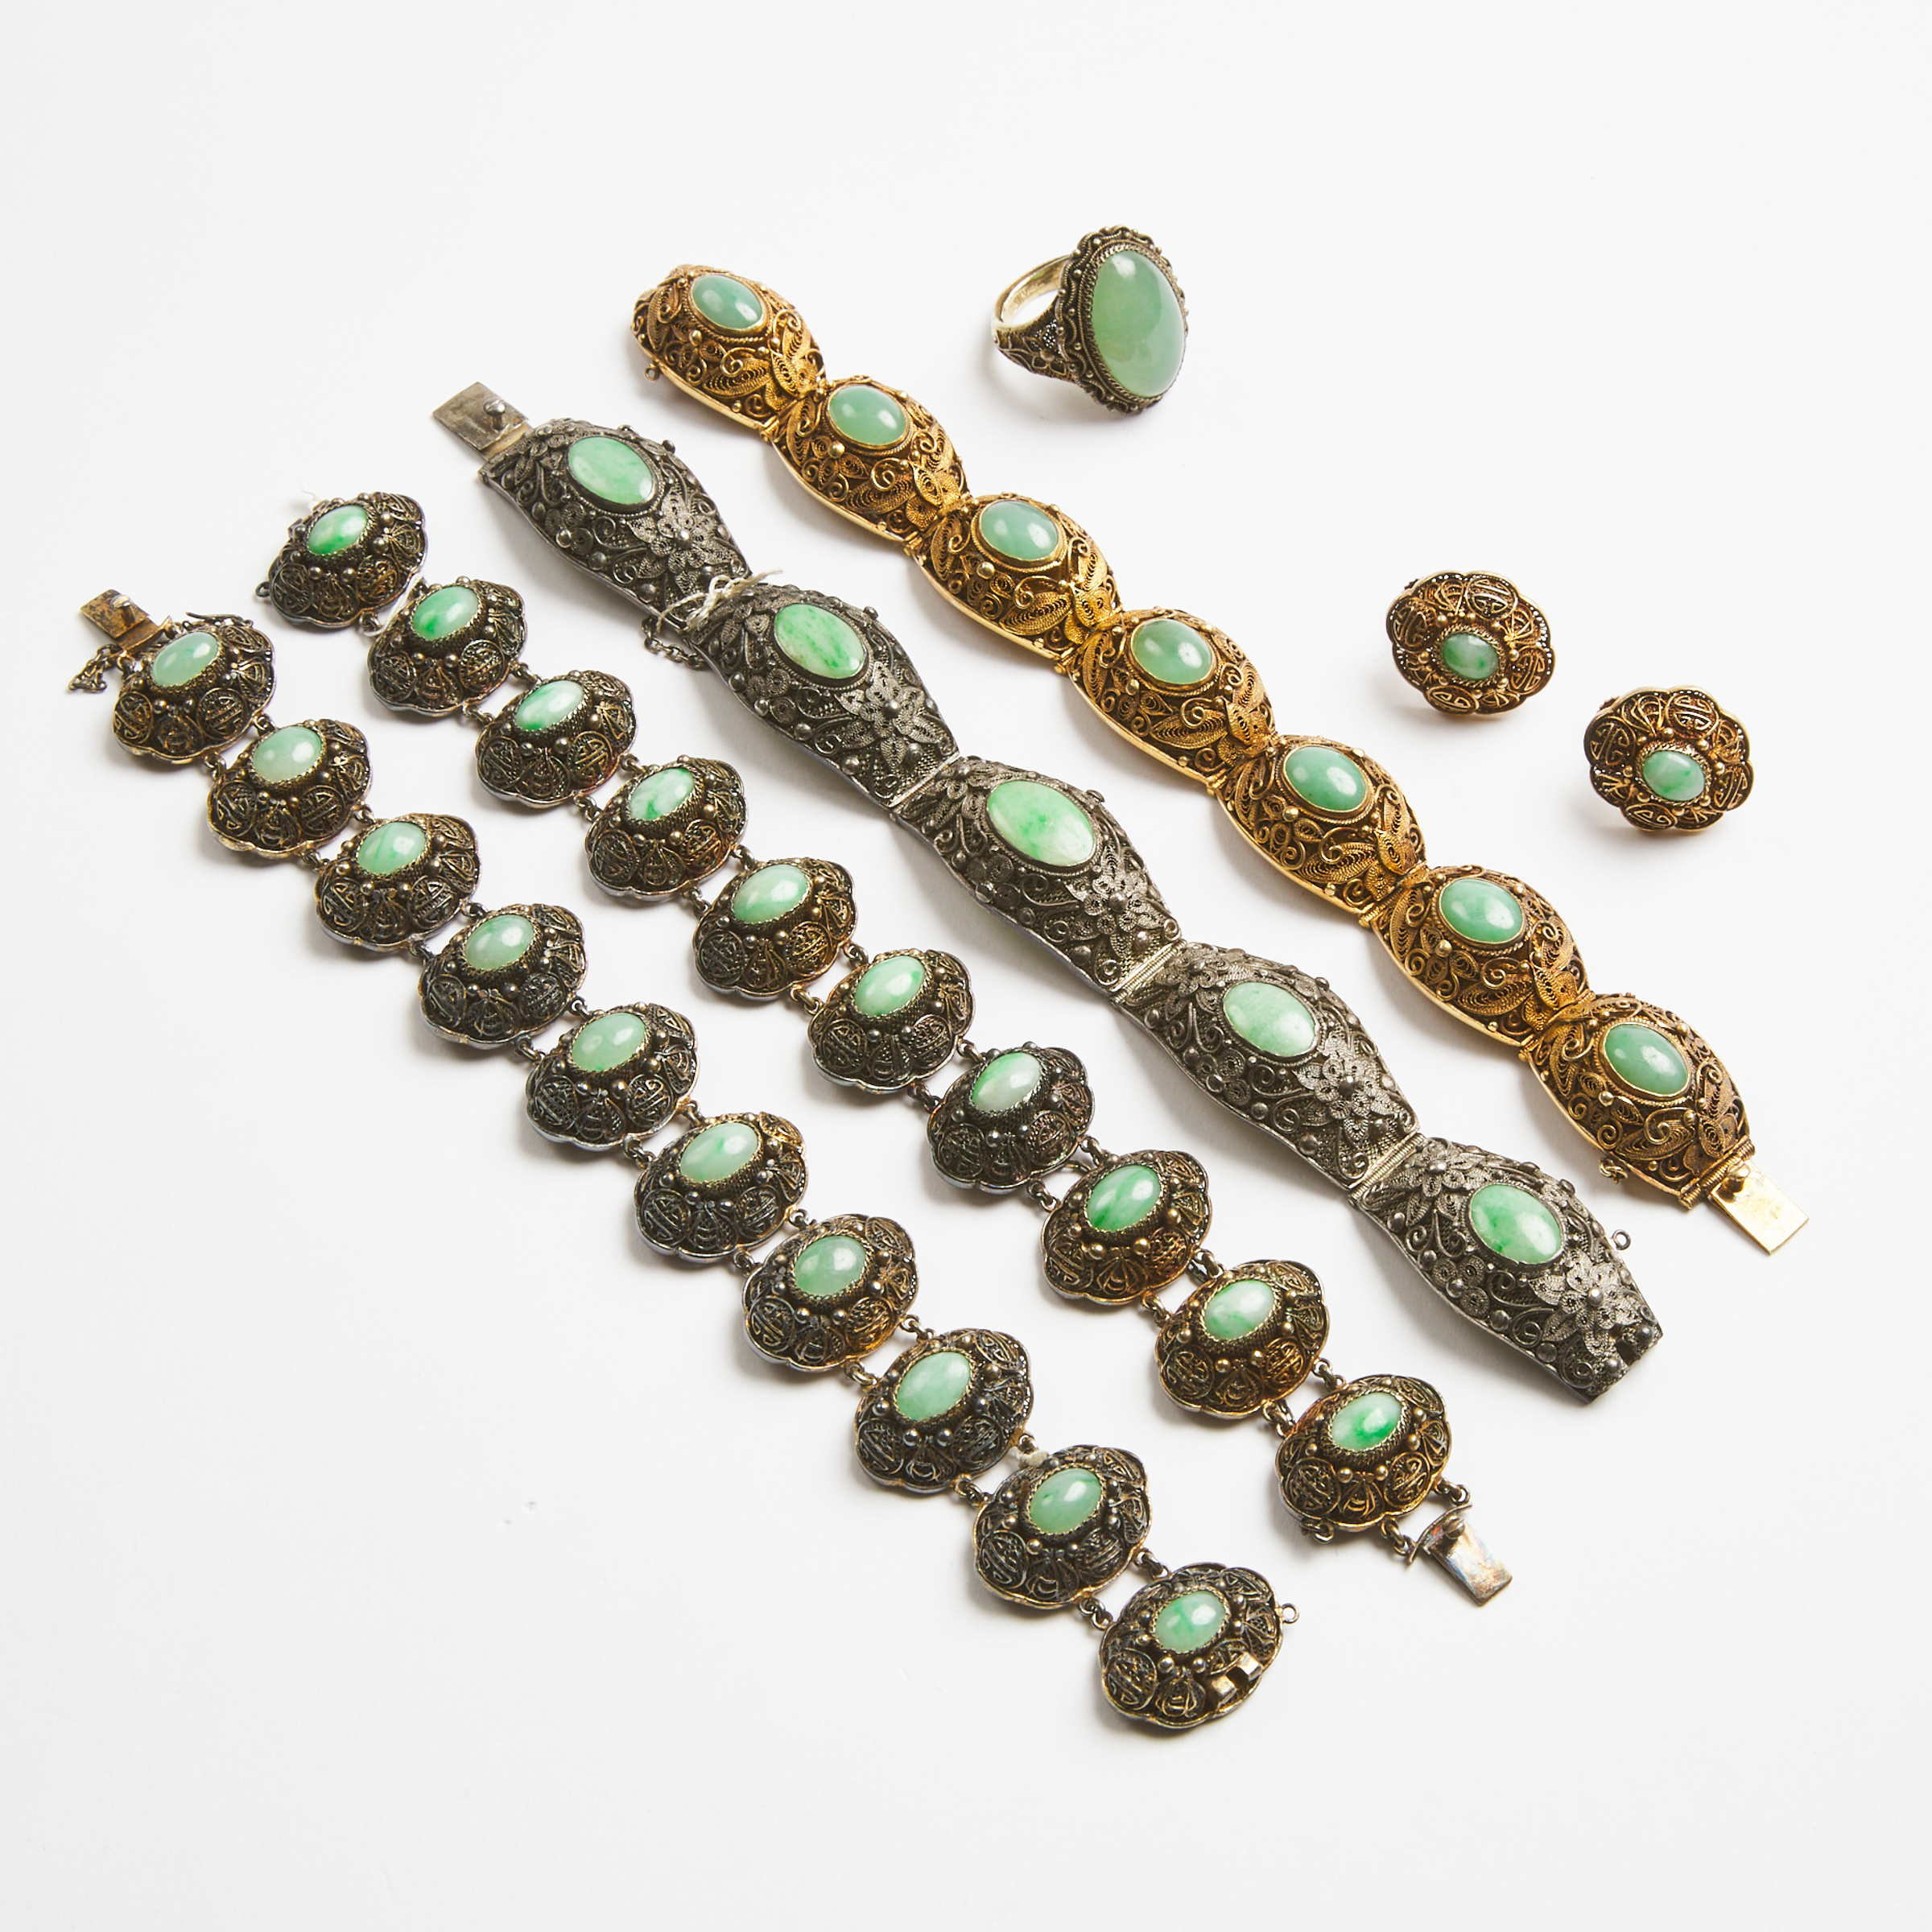 Four Strands of Gilt-Silver Filigree Jadeite-Inset Bracelets, Together With a Pair of Earrings, Late 19th/Early 20th Century